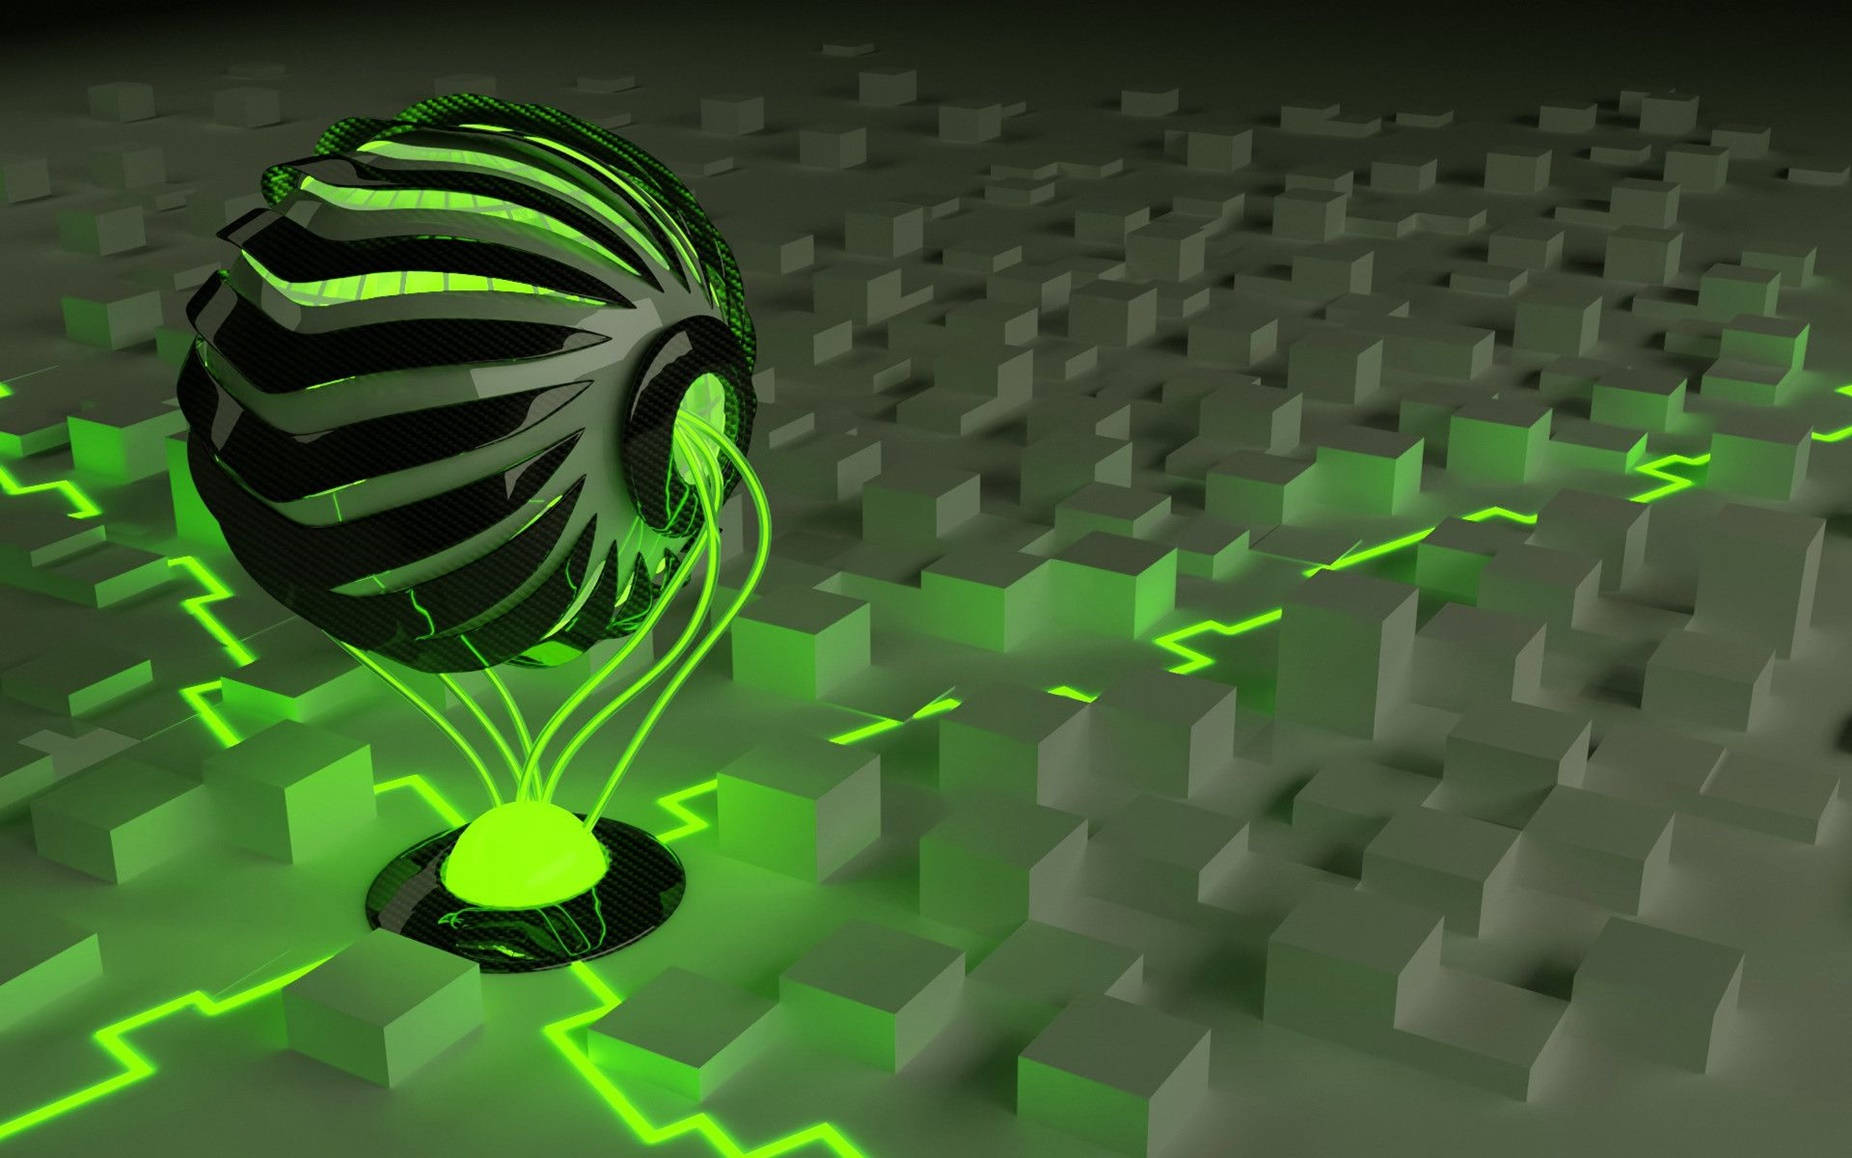 Black And Green Sphere 3d Animation Wallpaper